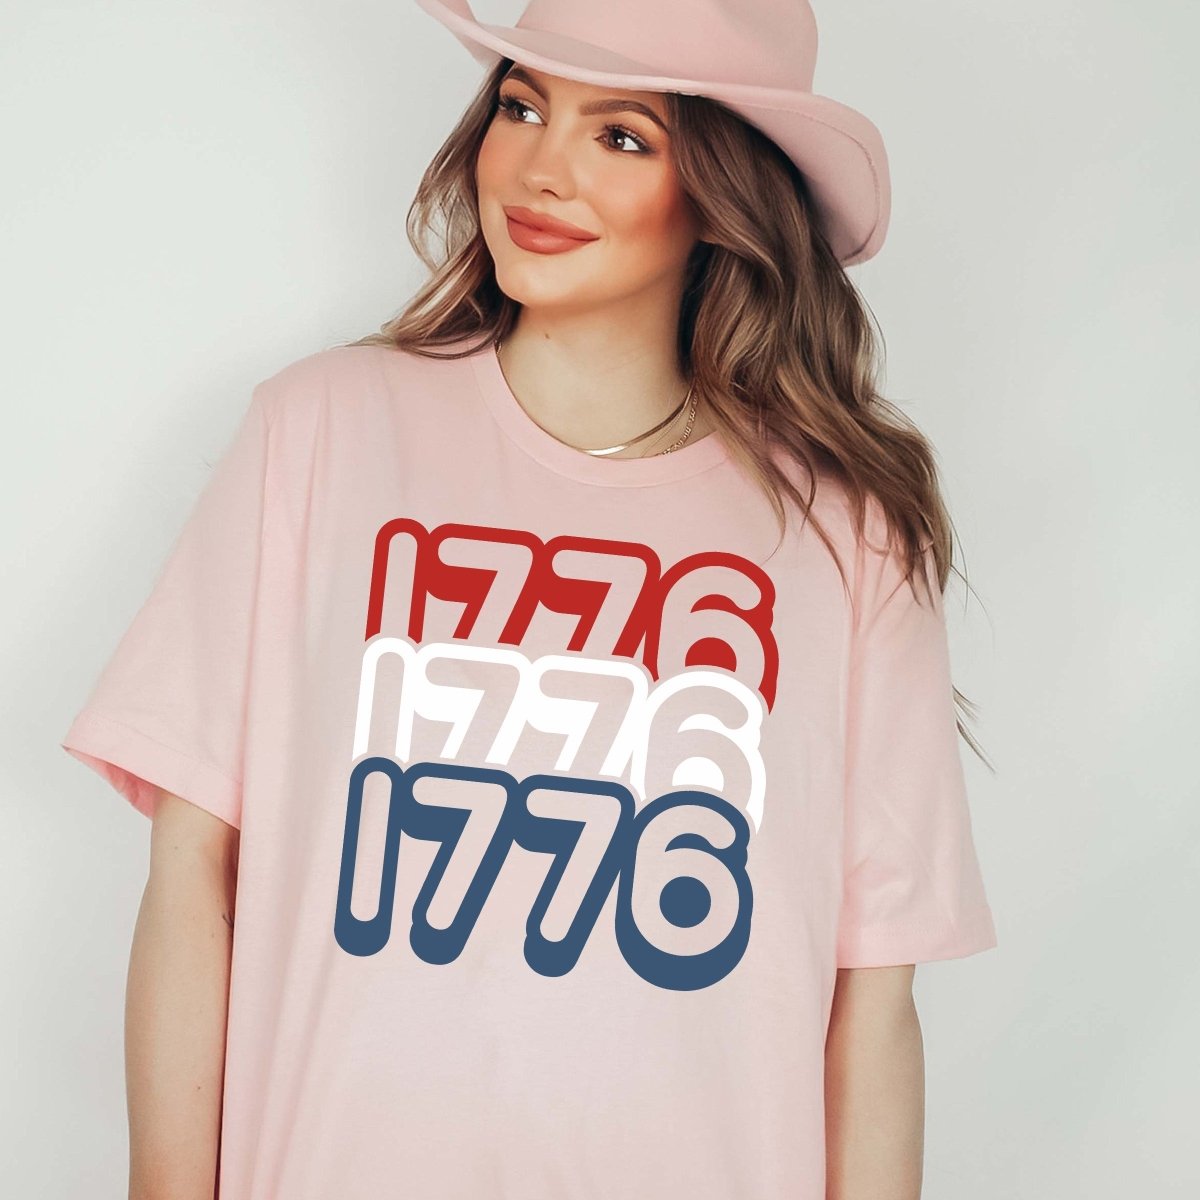 1776 Repeat Wholesale Tee - Limeberry Designs